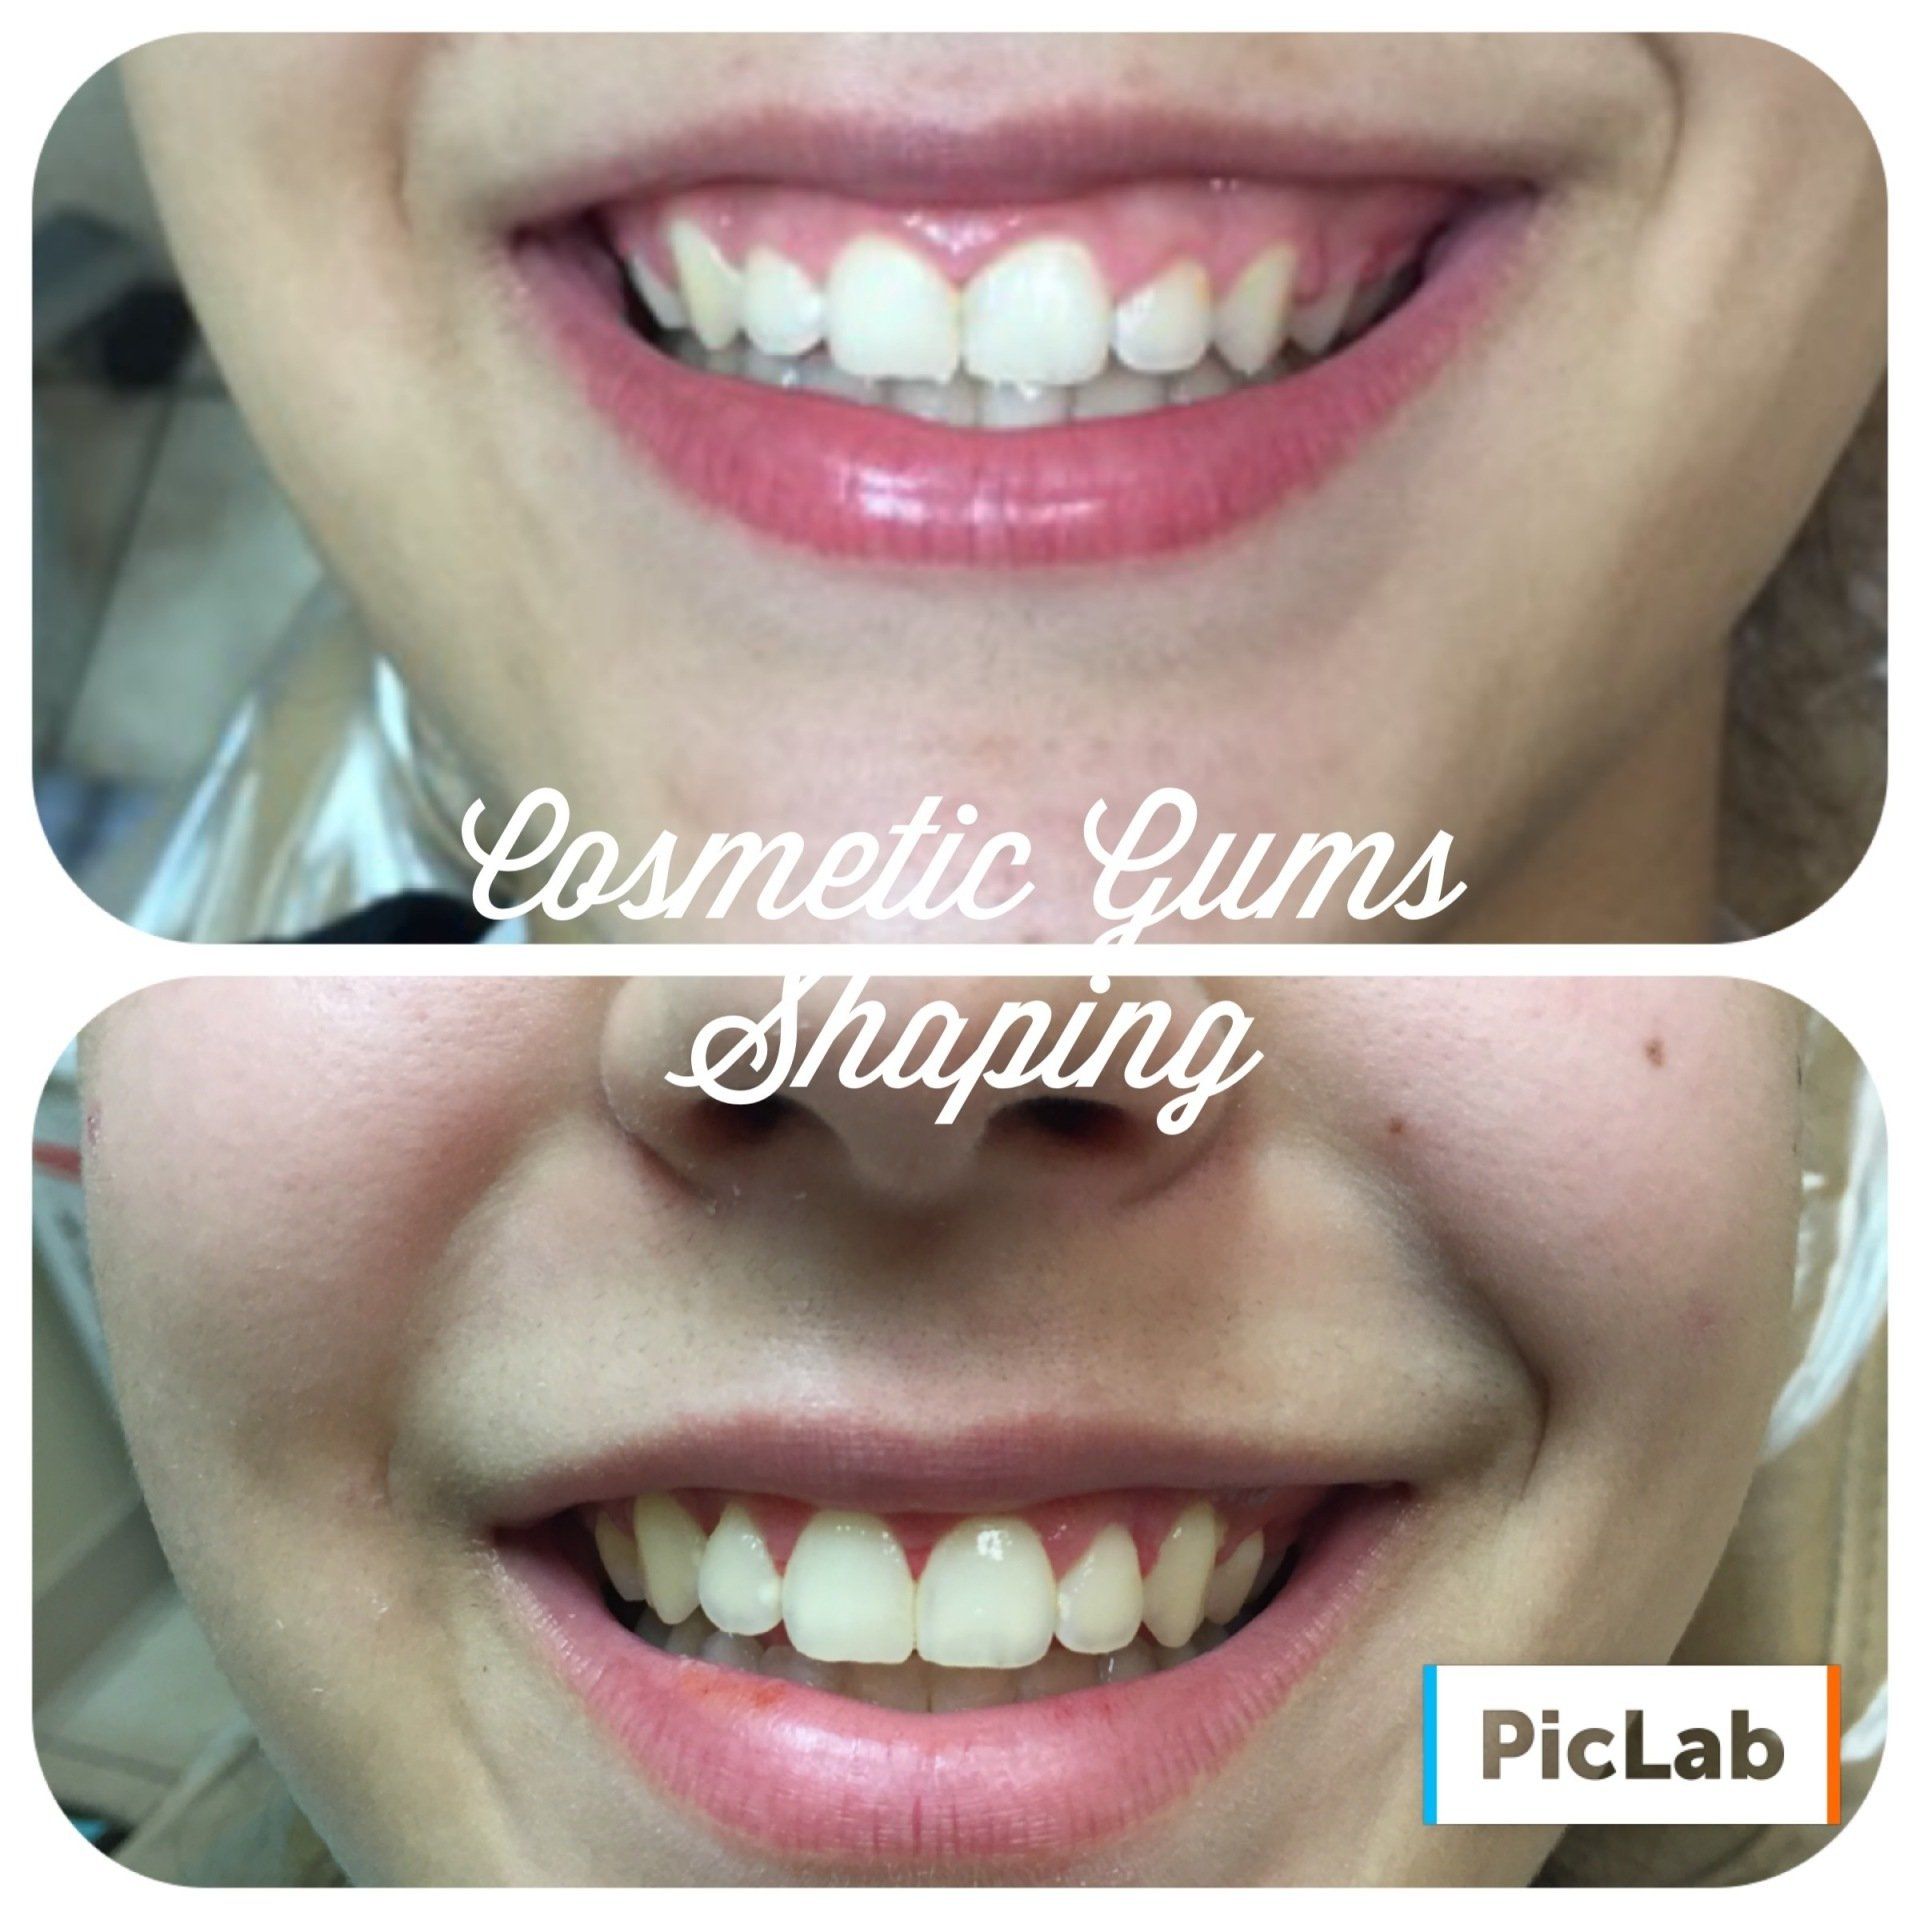 Cosmetic Gum Shaping Results